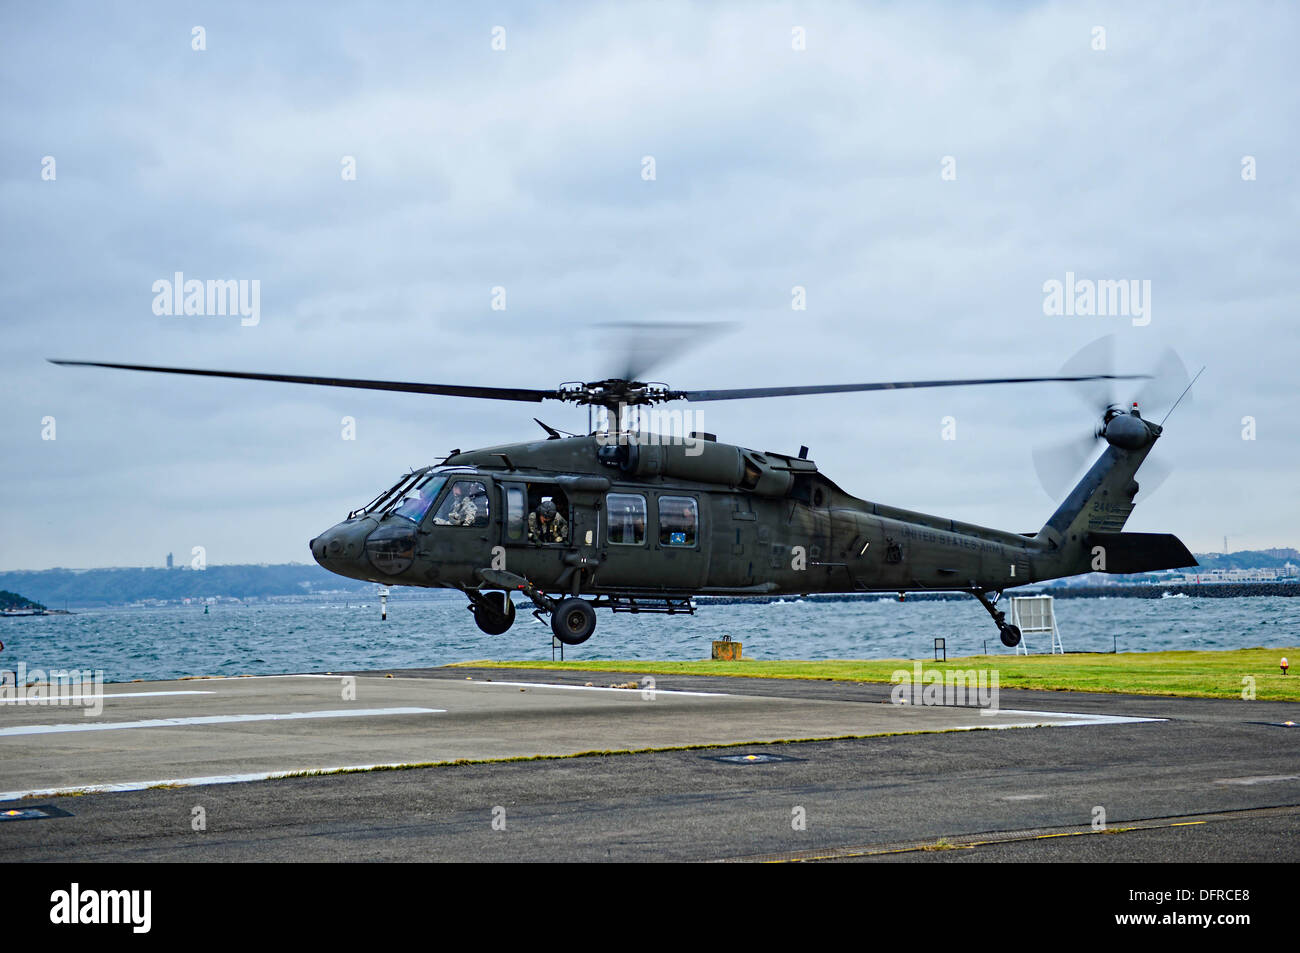 A U.S. Army UH60 Black Hawk helicopter carrying Secretary of Defense (SECDEF) Chuck Hagel lands at Commander, Fleet Activities Stock Photo